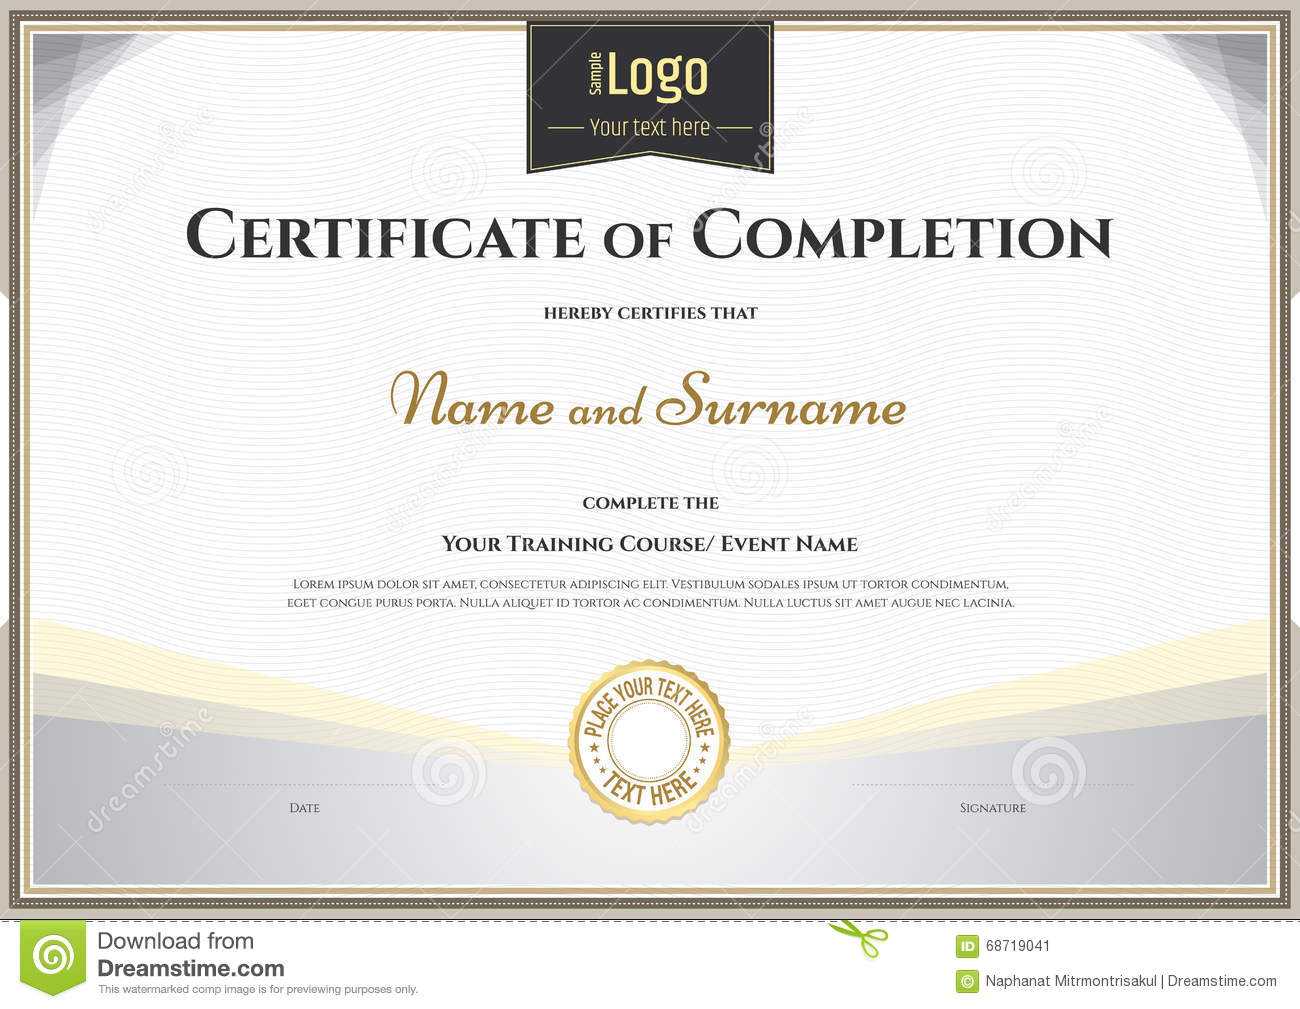 Certificate Of Completion Template In Vector For Achievement Intended For Certification Of Completion Template